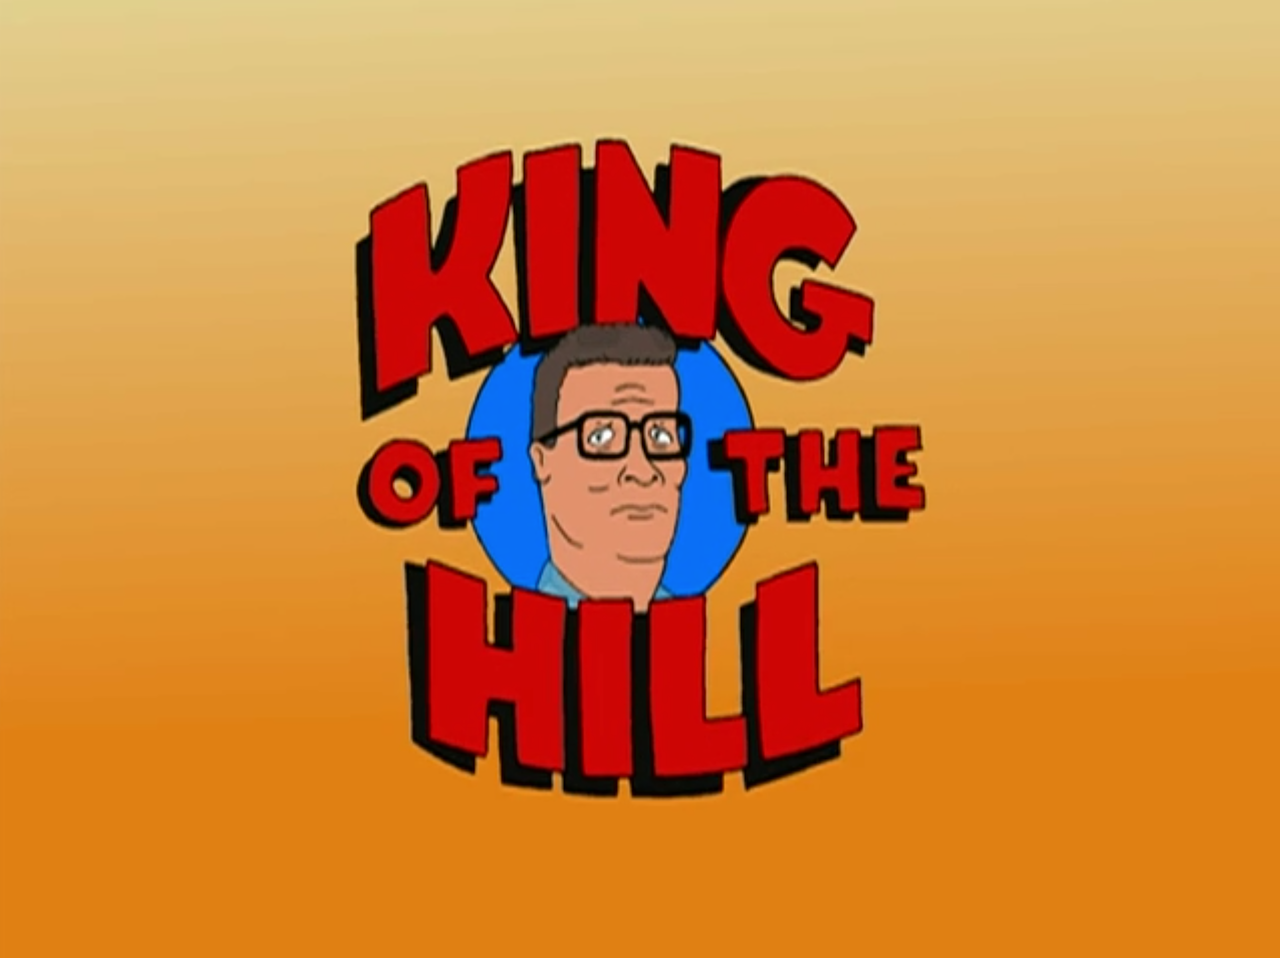 King of the Hill Full Episodes